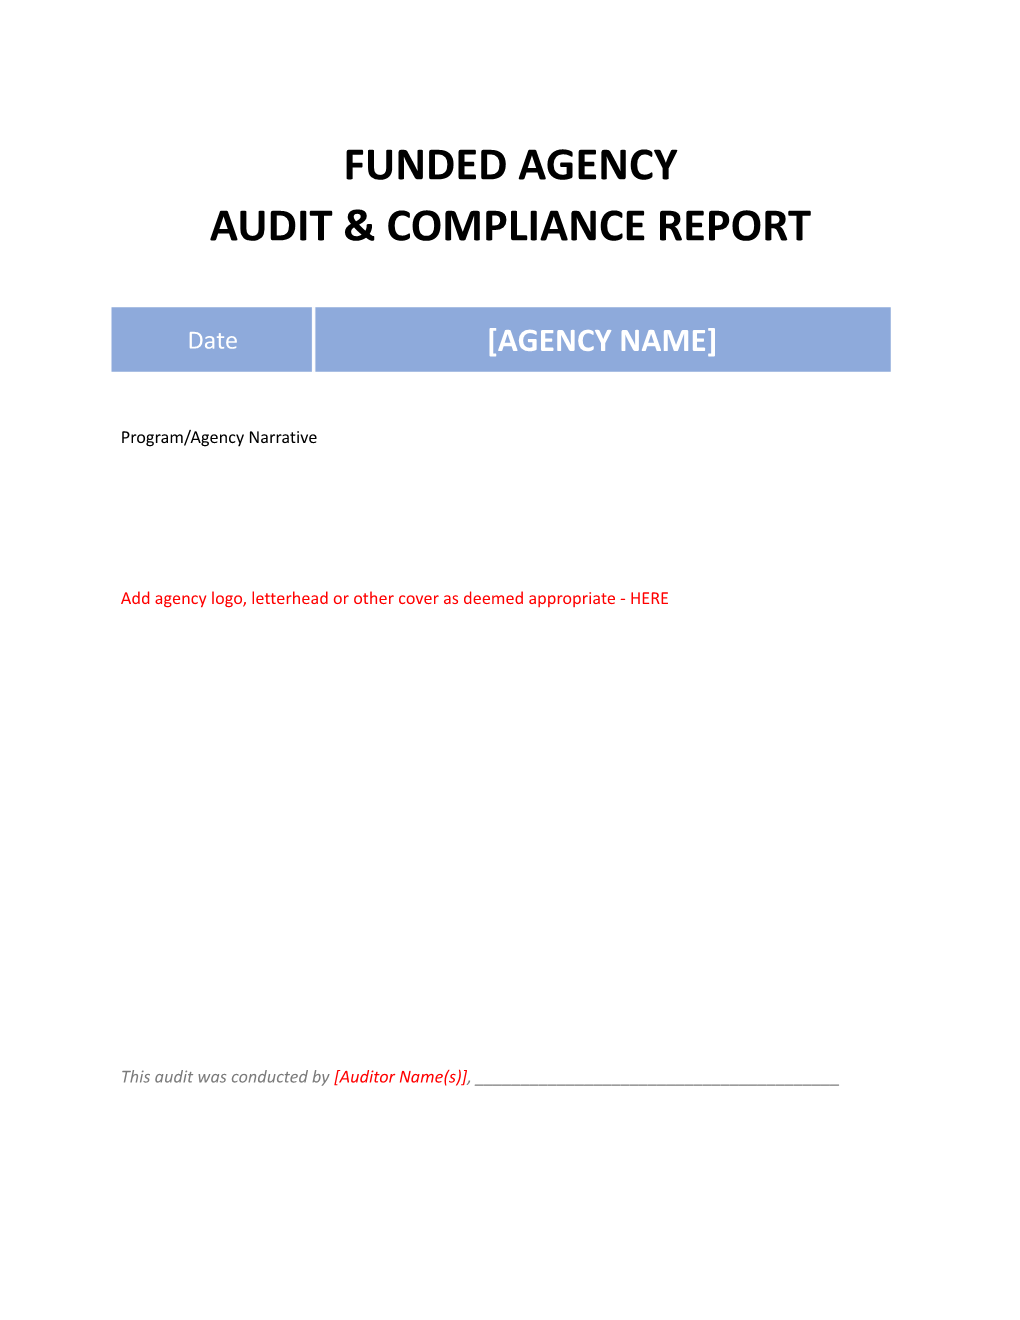 Funded Agency Audit & Compliance Report